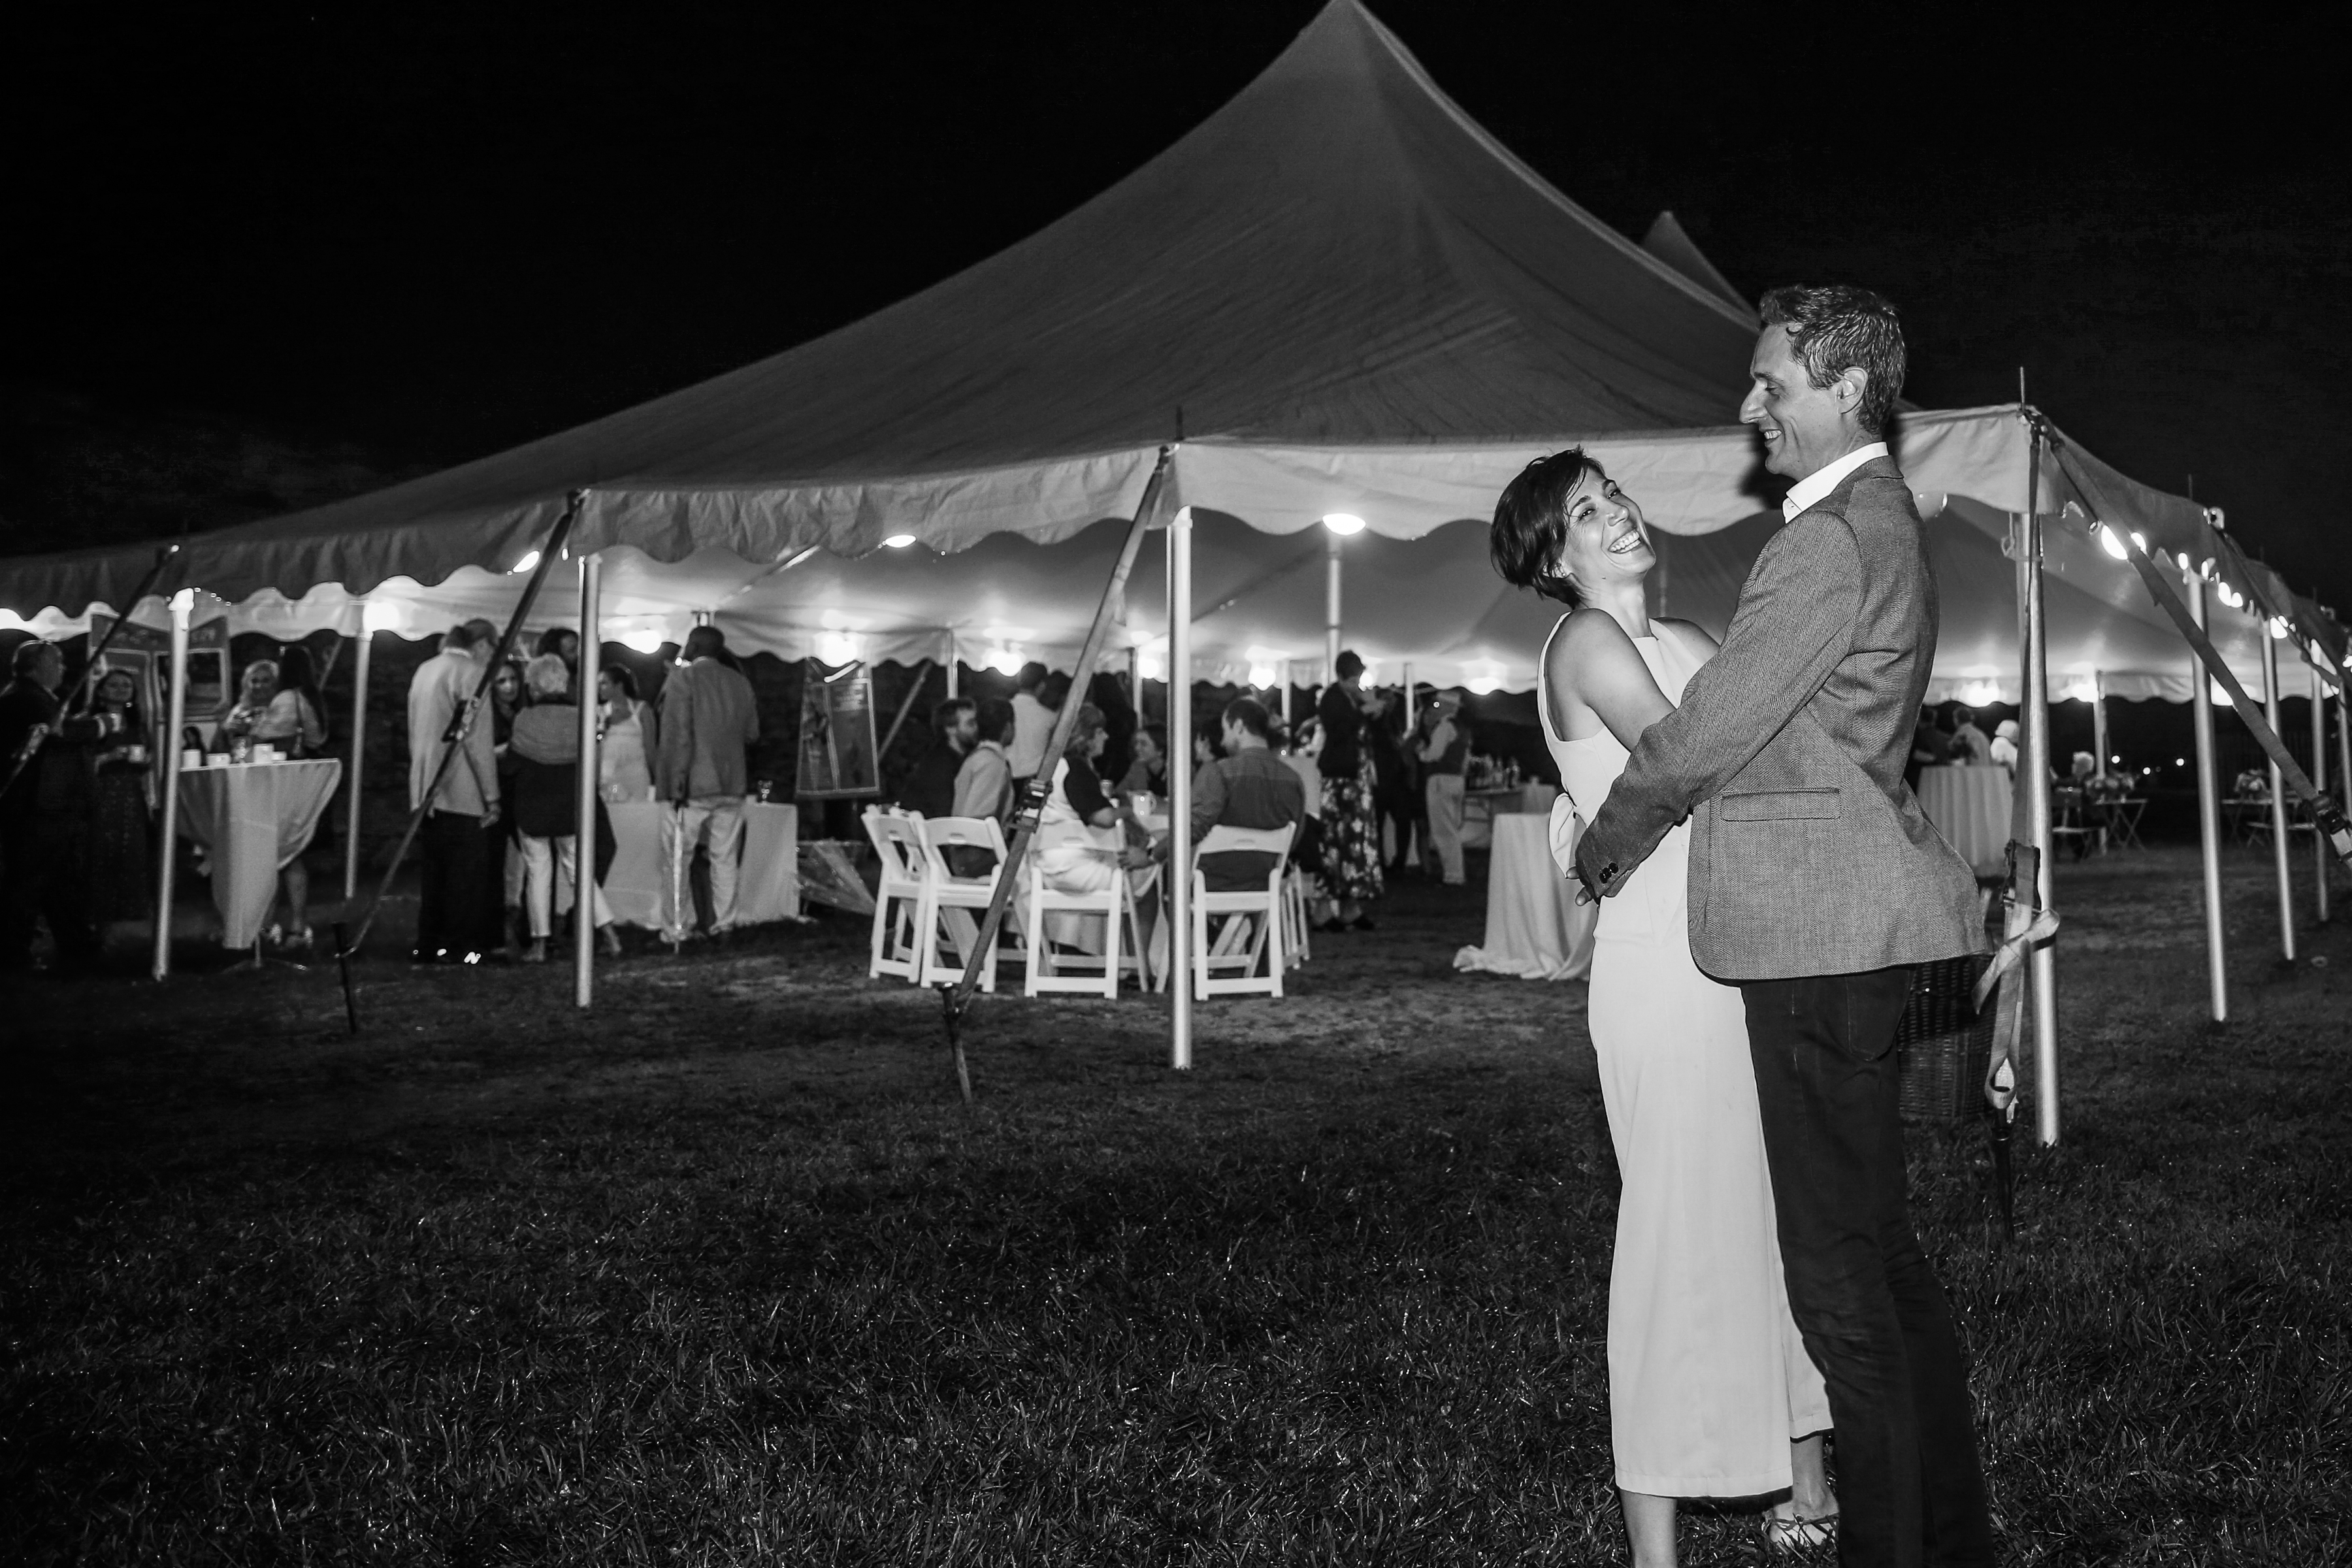 A bride and groom dancing under a tent.